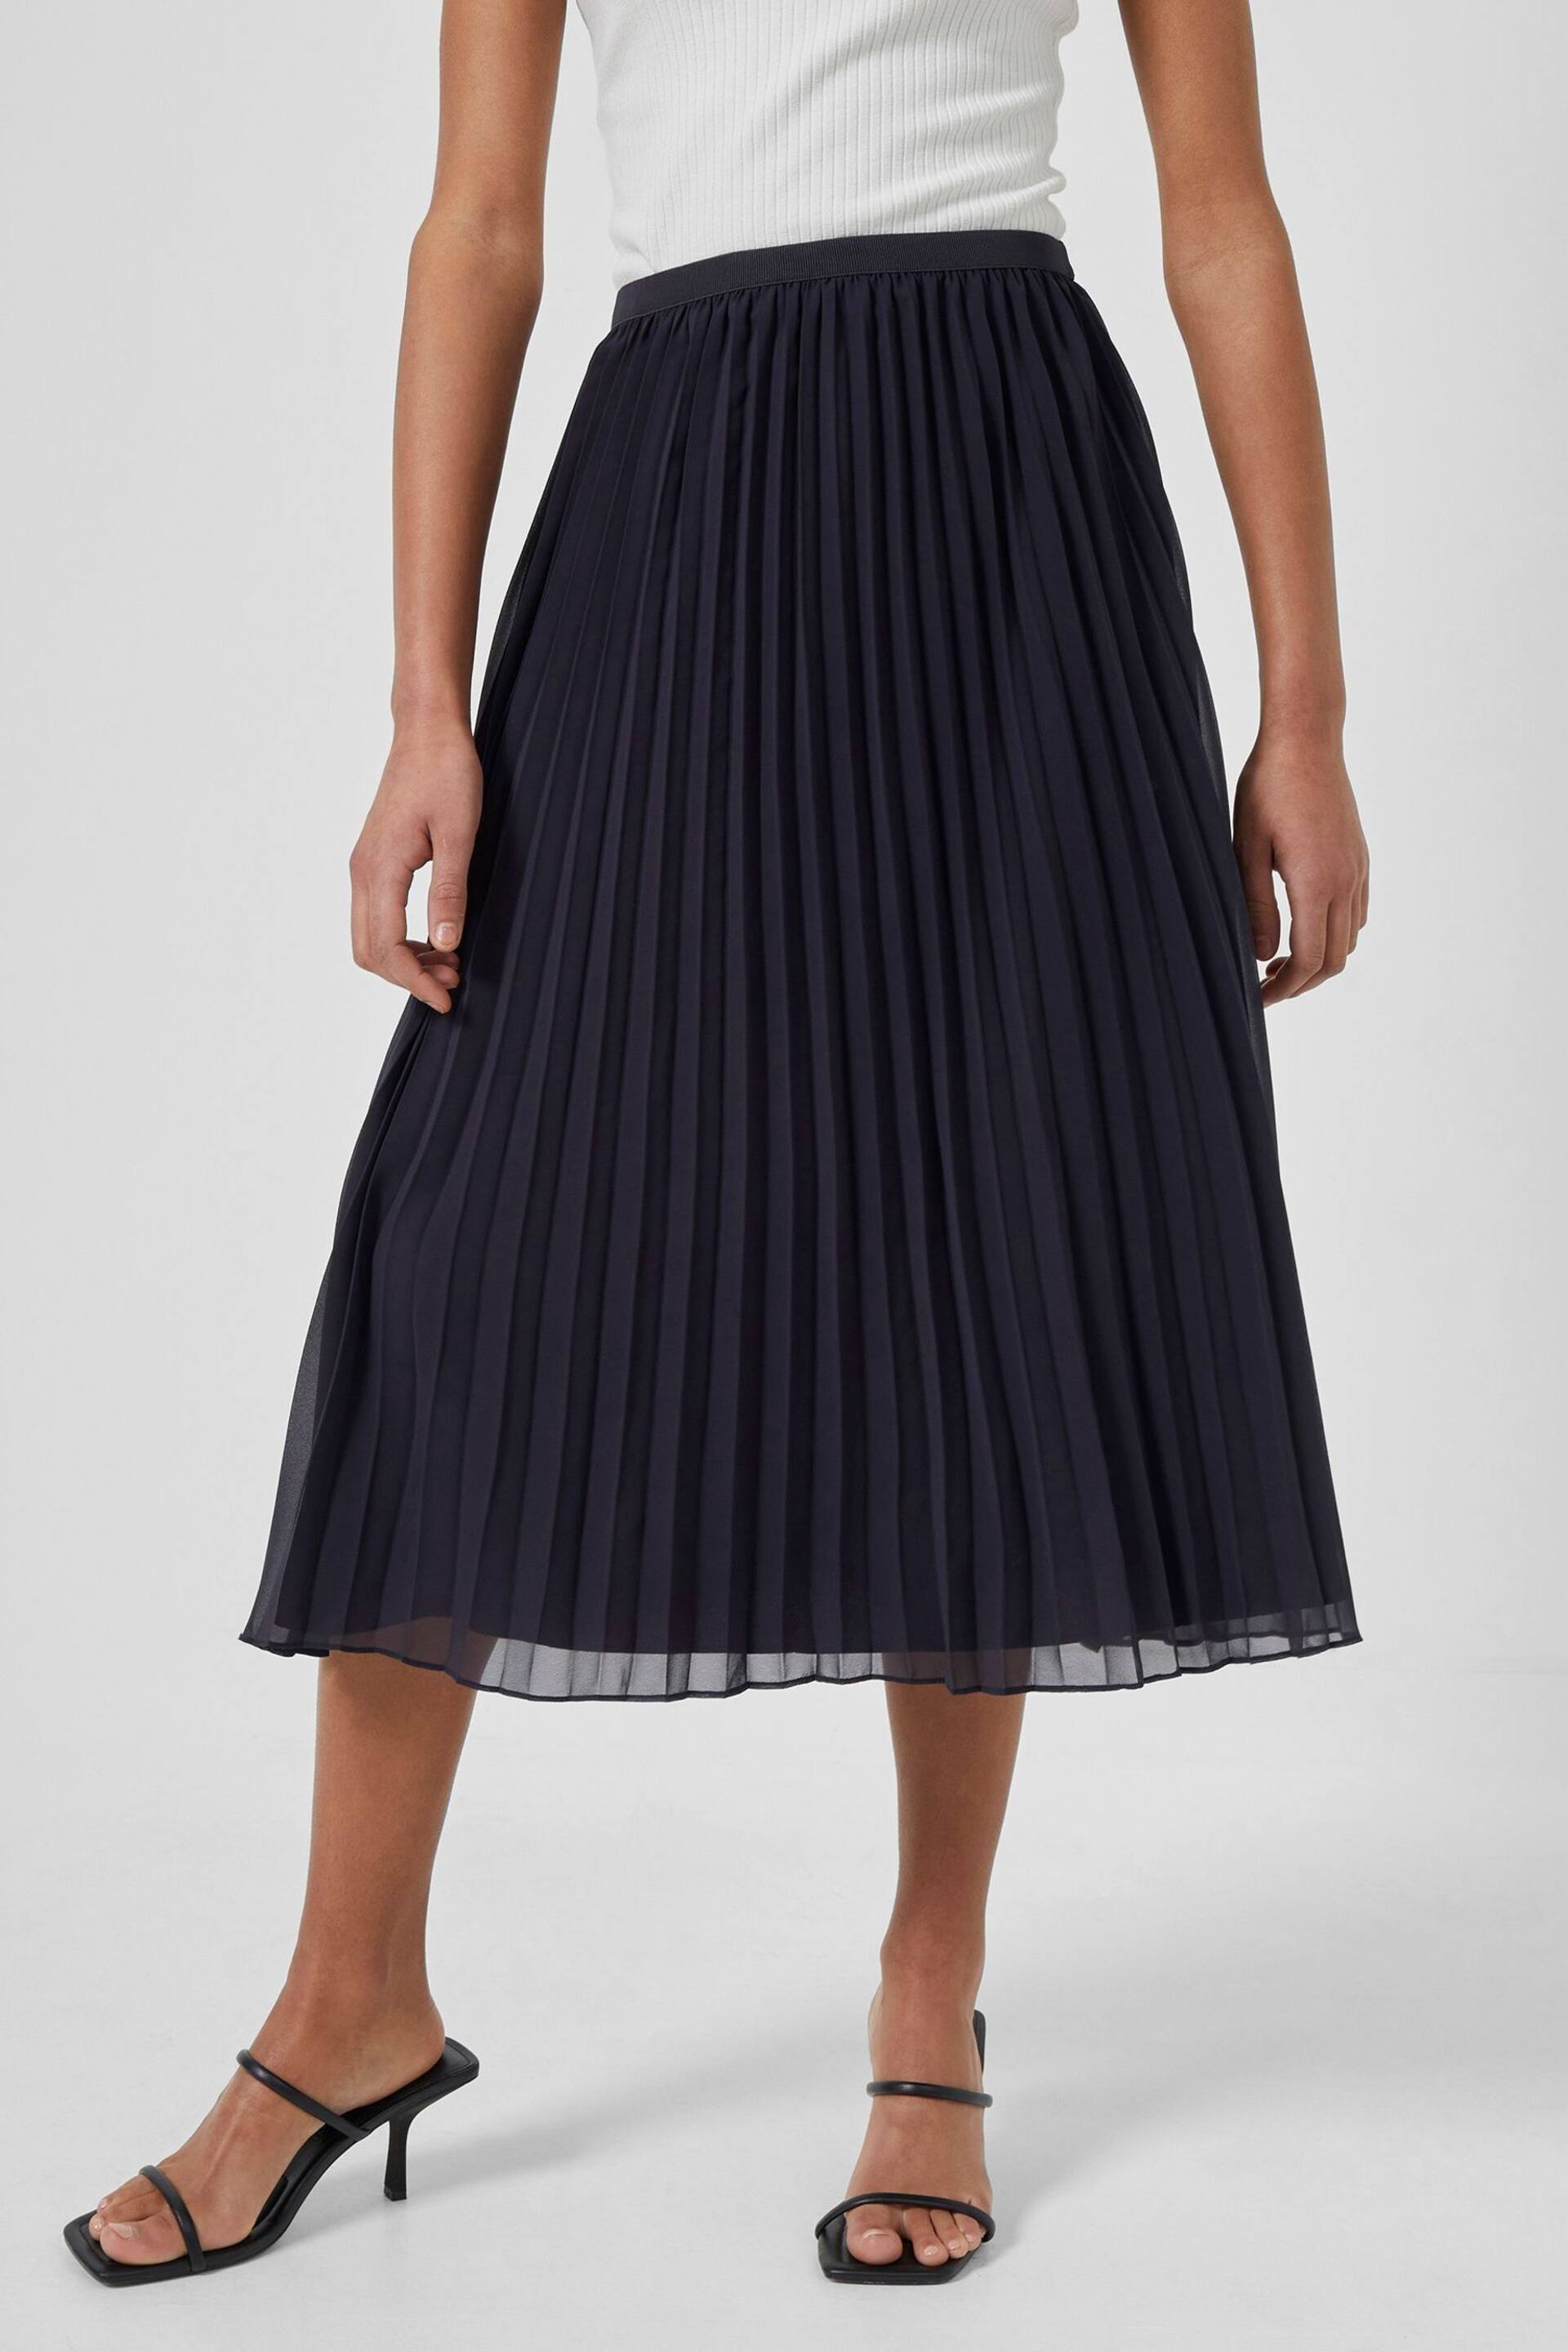 French Connection Pleated Solid Skirt - Image 1 of 4